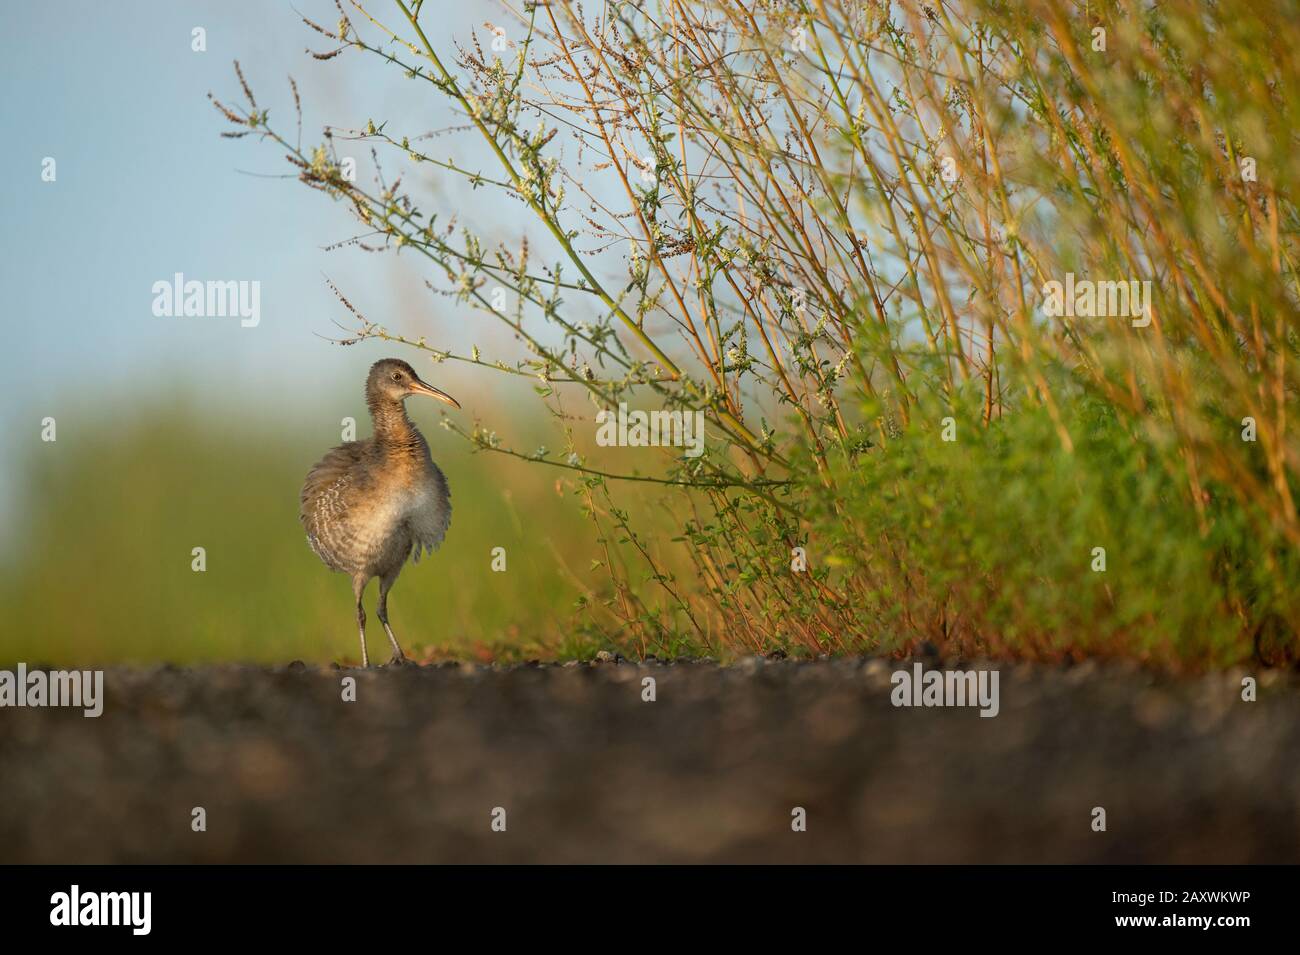 A Clapper Rail all ruffled up on an open road in the bright sunlight. Stock Photo